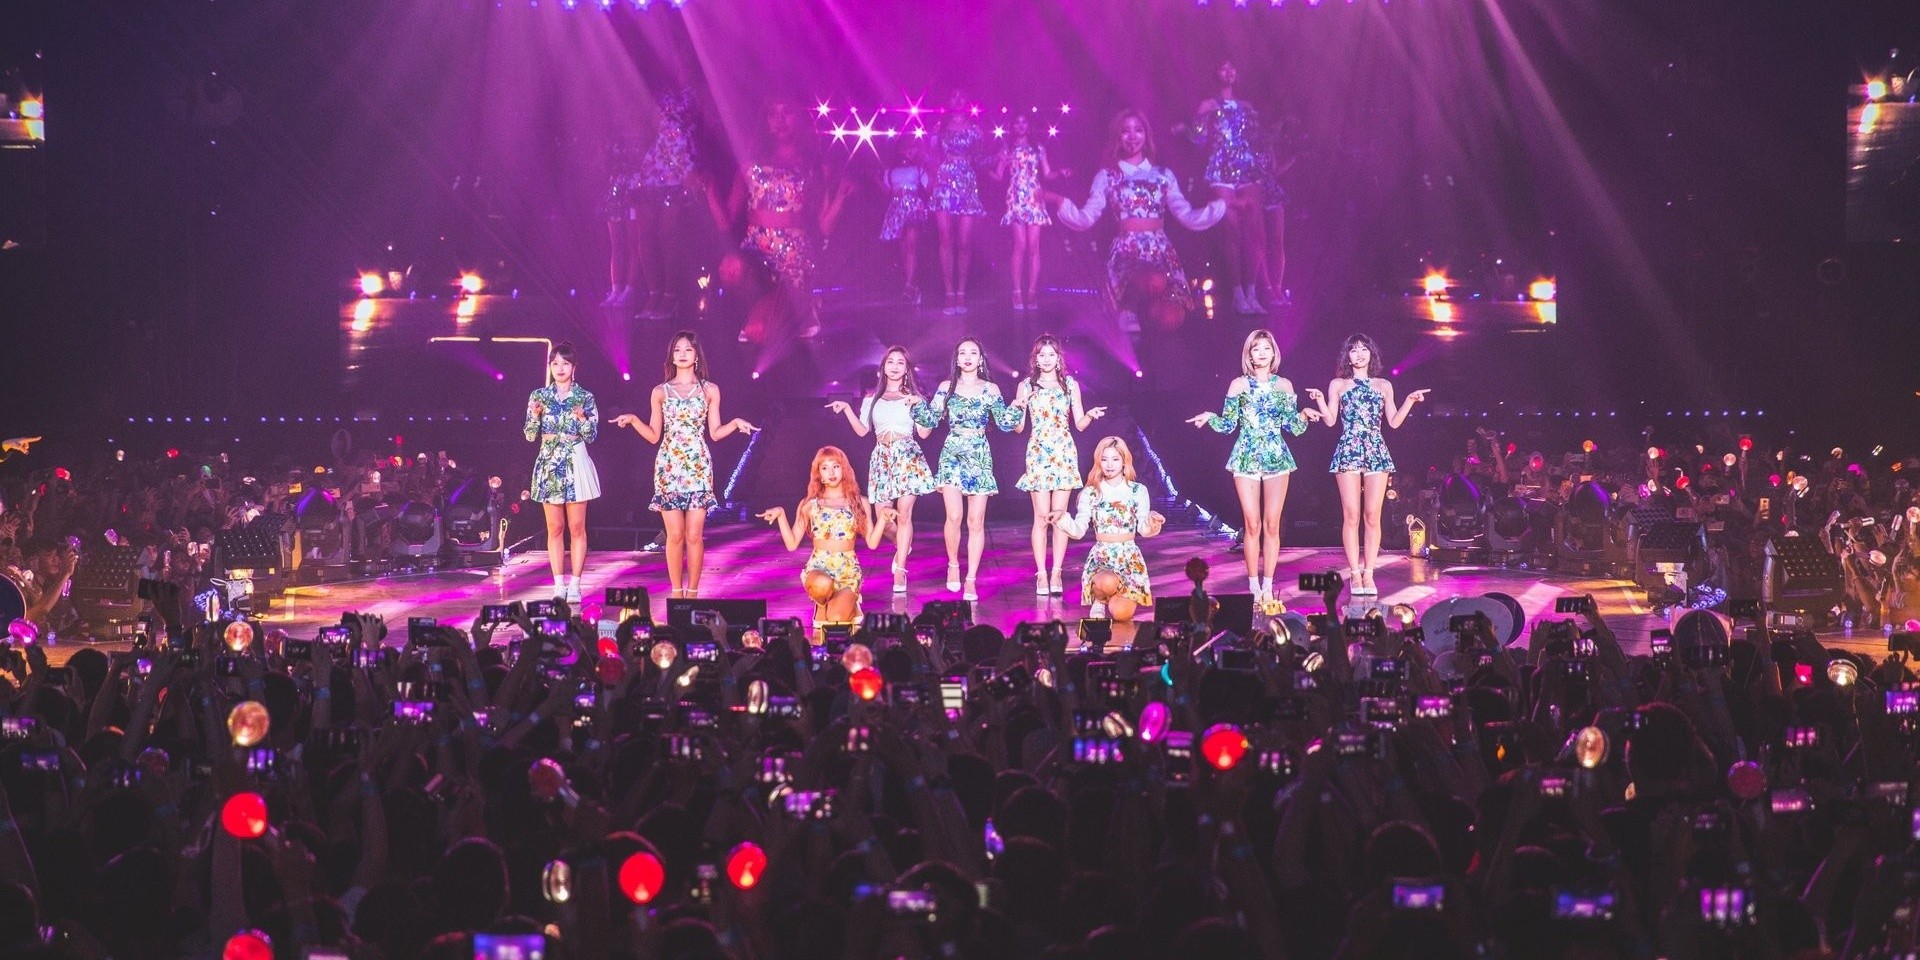 Teenager under investigation by the police after chanting gang slogans at TWICE's concert in Singapore